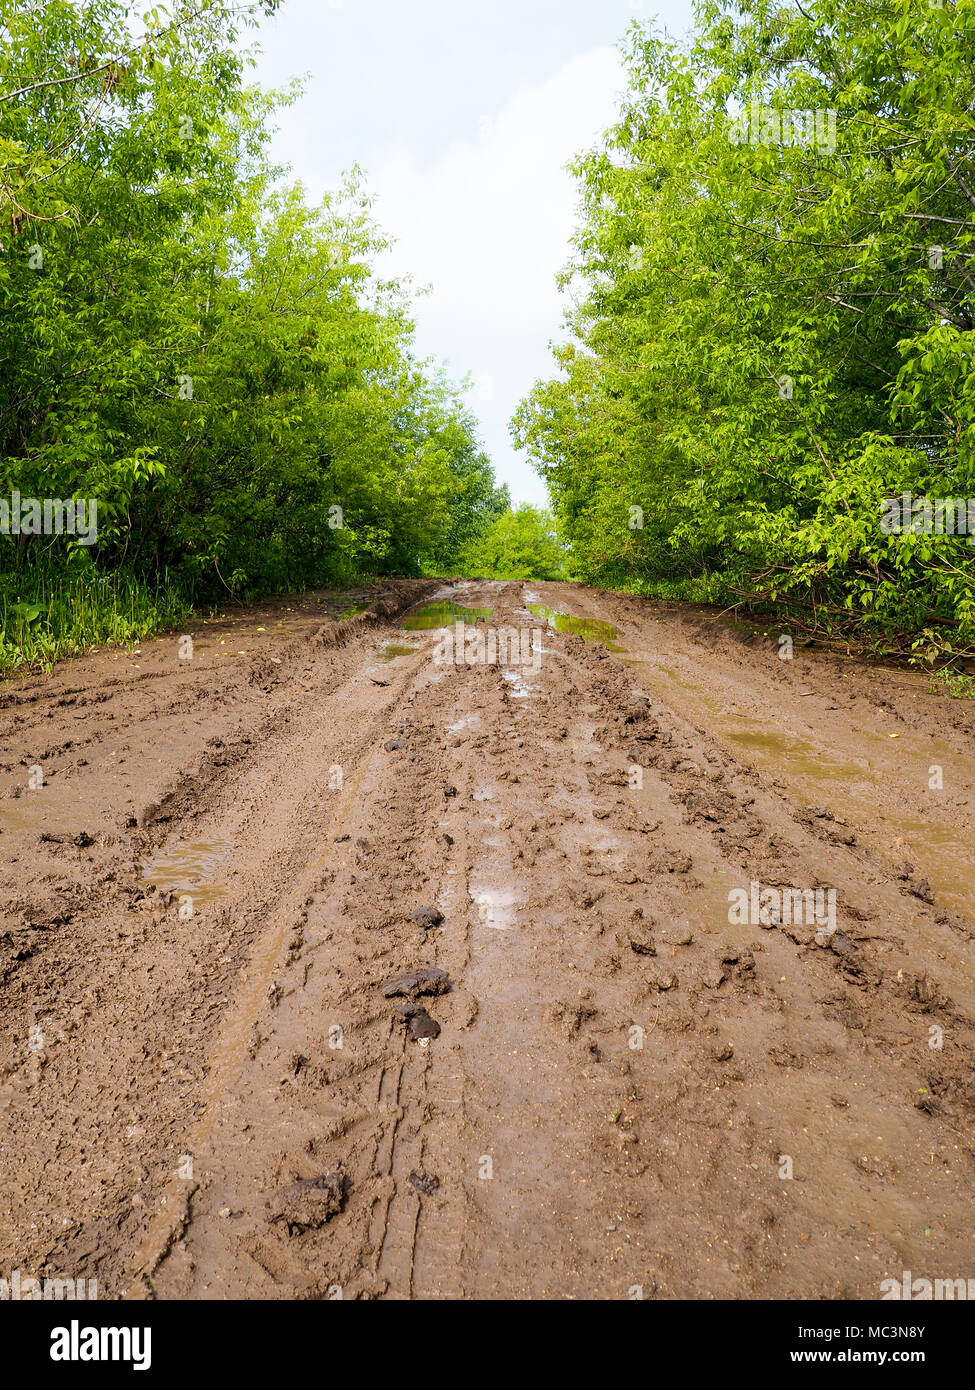 Wet muddy country road, A country road with ruts and puddles, spring Stock Photo